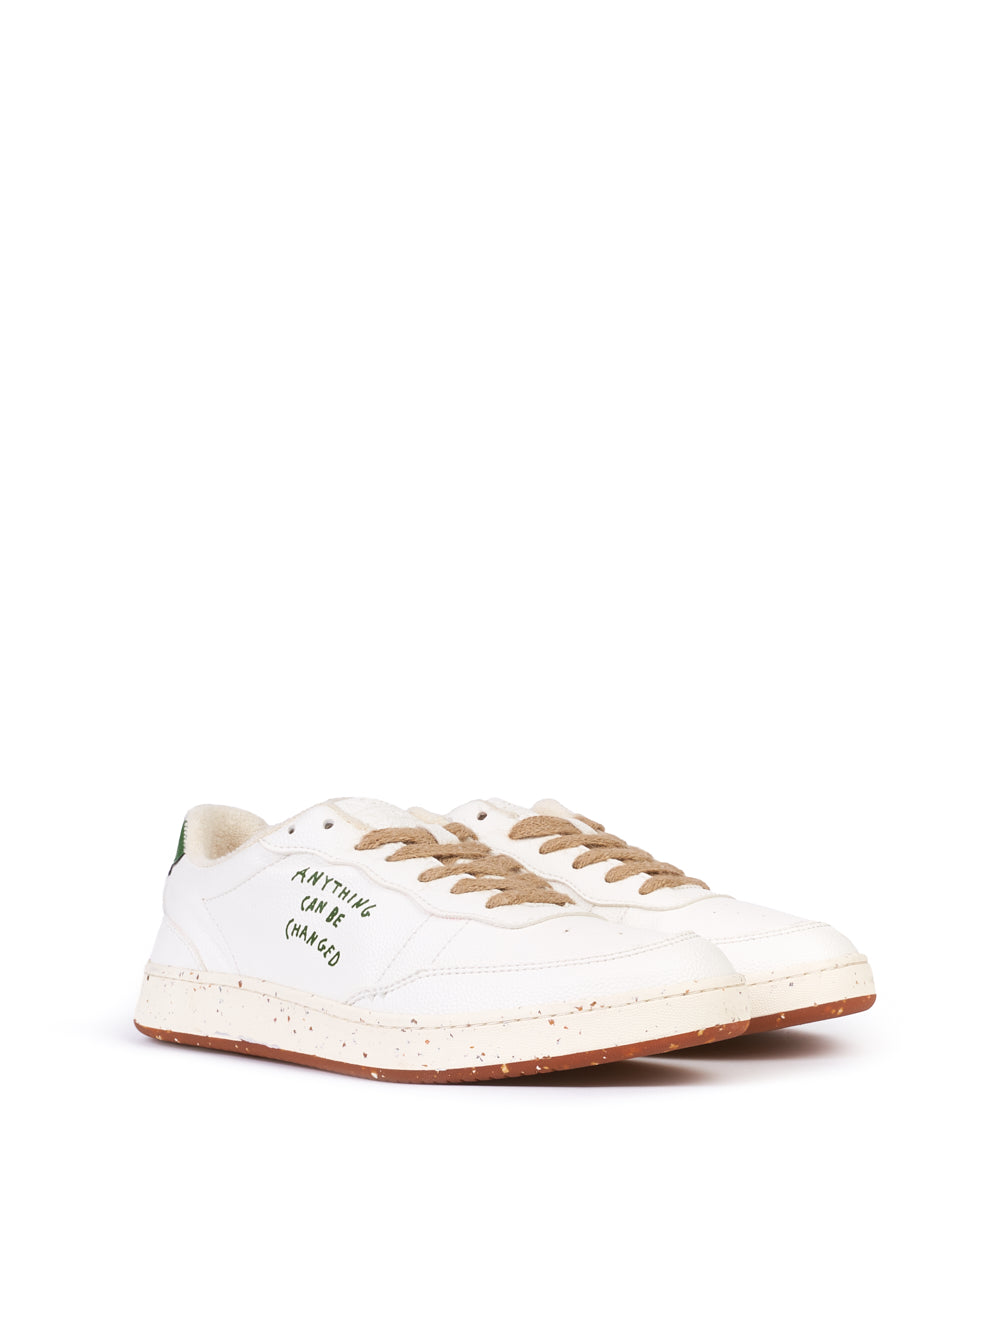 Sneaker ACBC 100% recicled
Bianco/verde